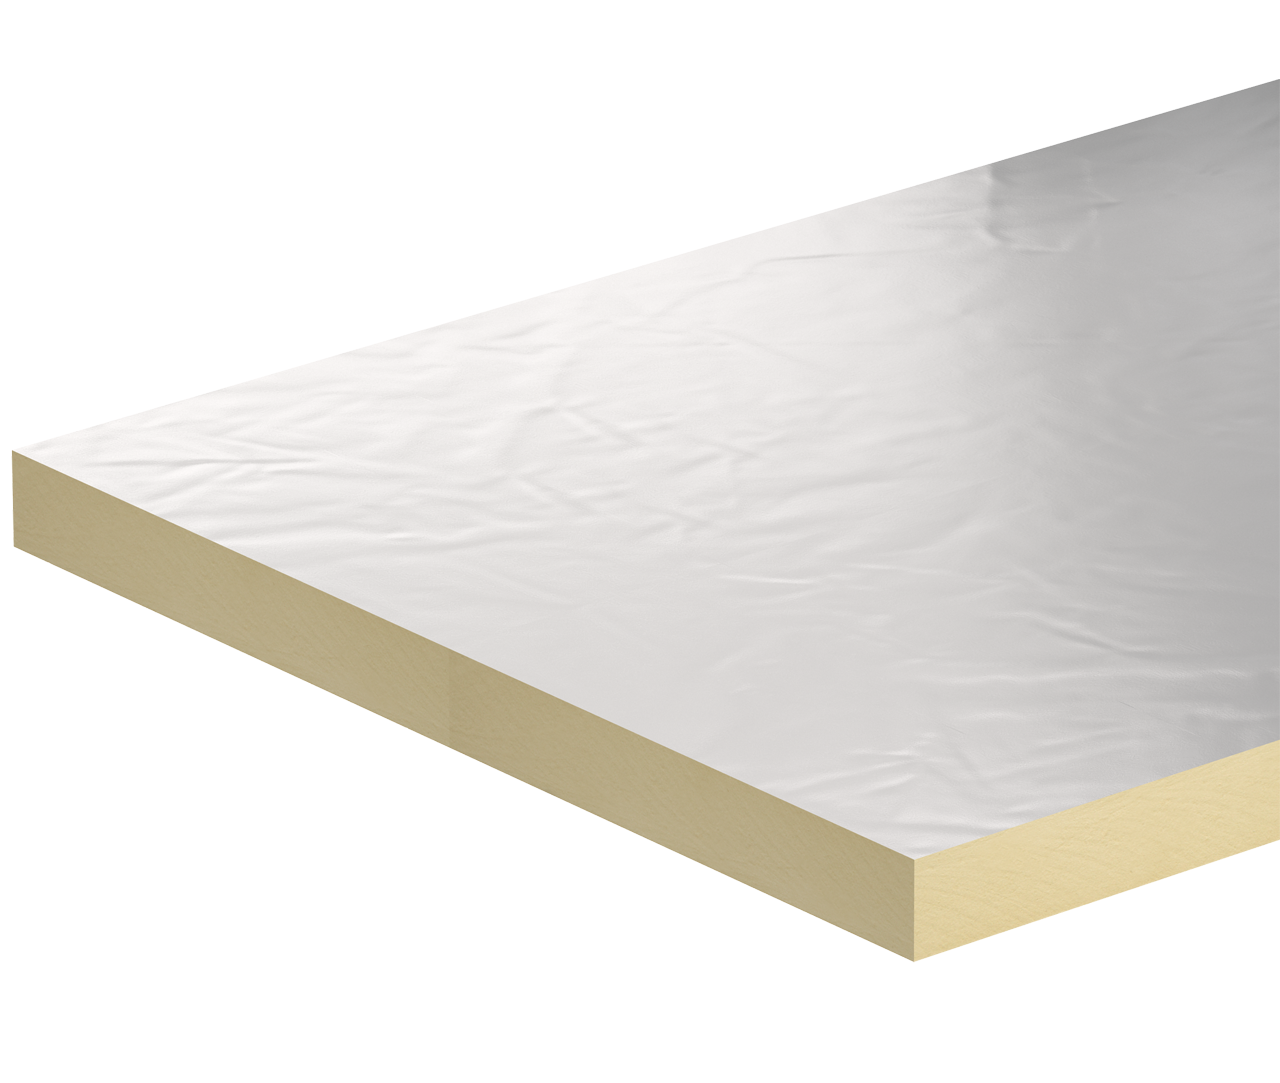 Kingspan Thermaroof TR26 Flat Roof Insulation - 2400mm x 1200mm